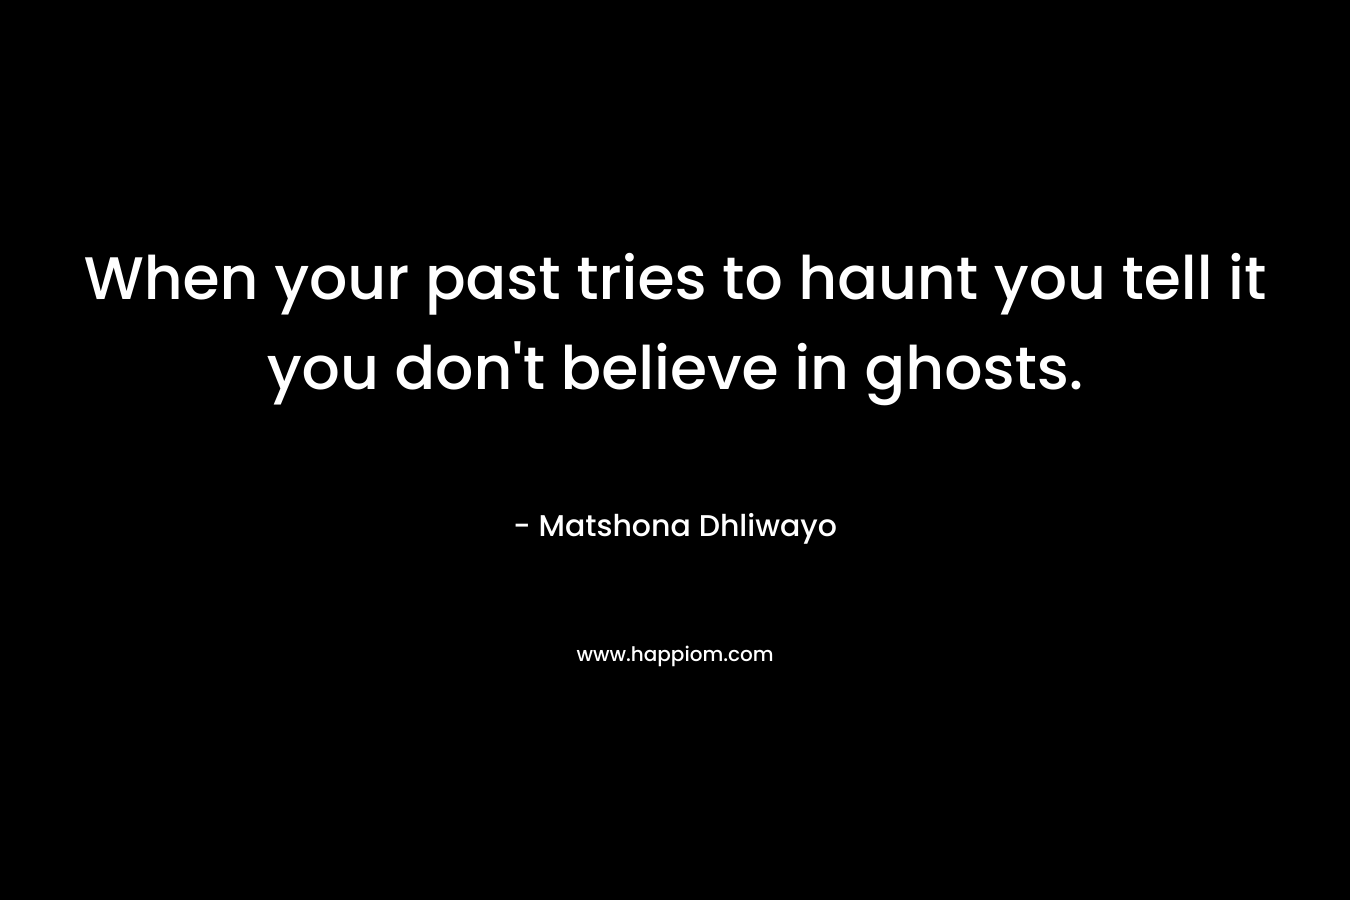 When your past tries to haunt you tell it you don't believe in ghosts.